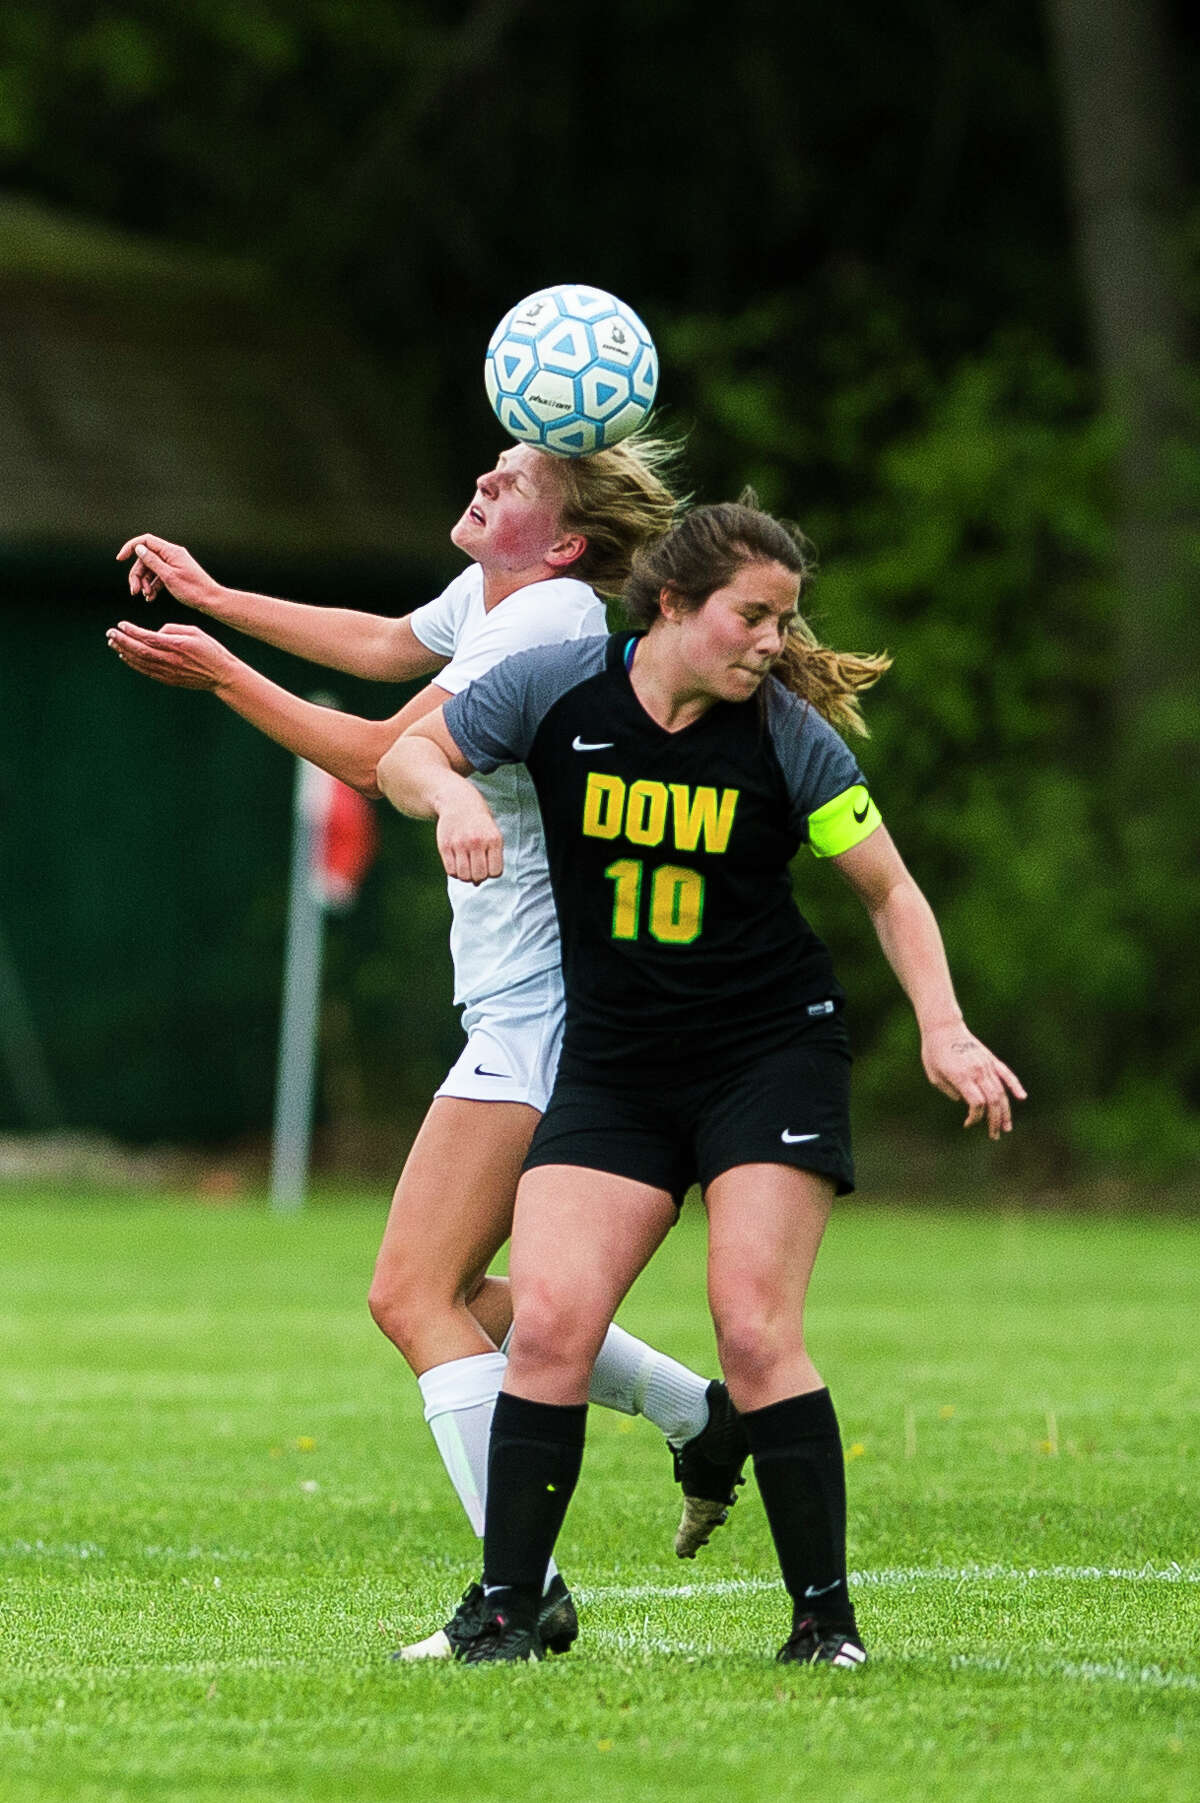 Midland's Sami Vansumeren and Dow's Elizabeth Green fight for possession during a game on Tuesday, May 28, 2019 at H. H. Dow High School. (Katy Kildee/kkildee@mdn.net)